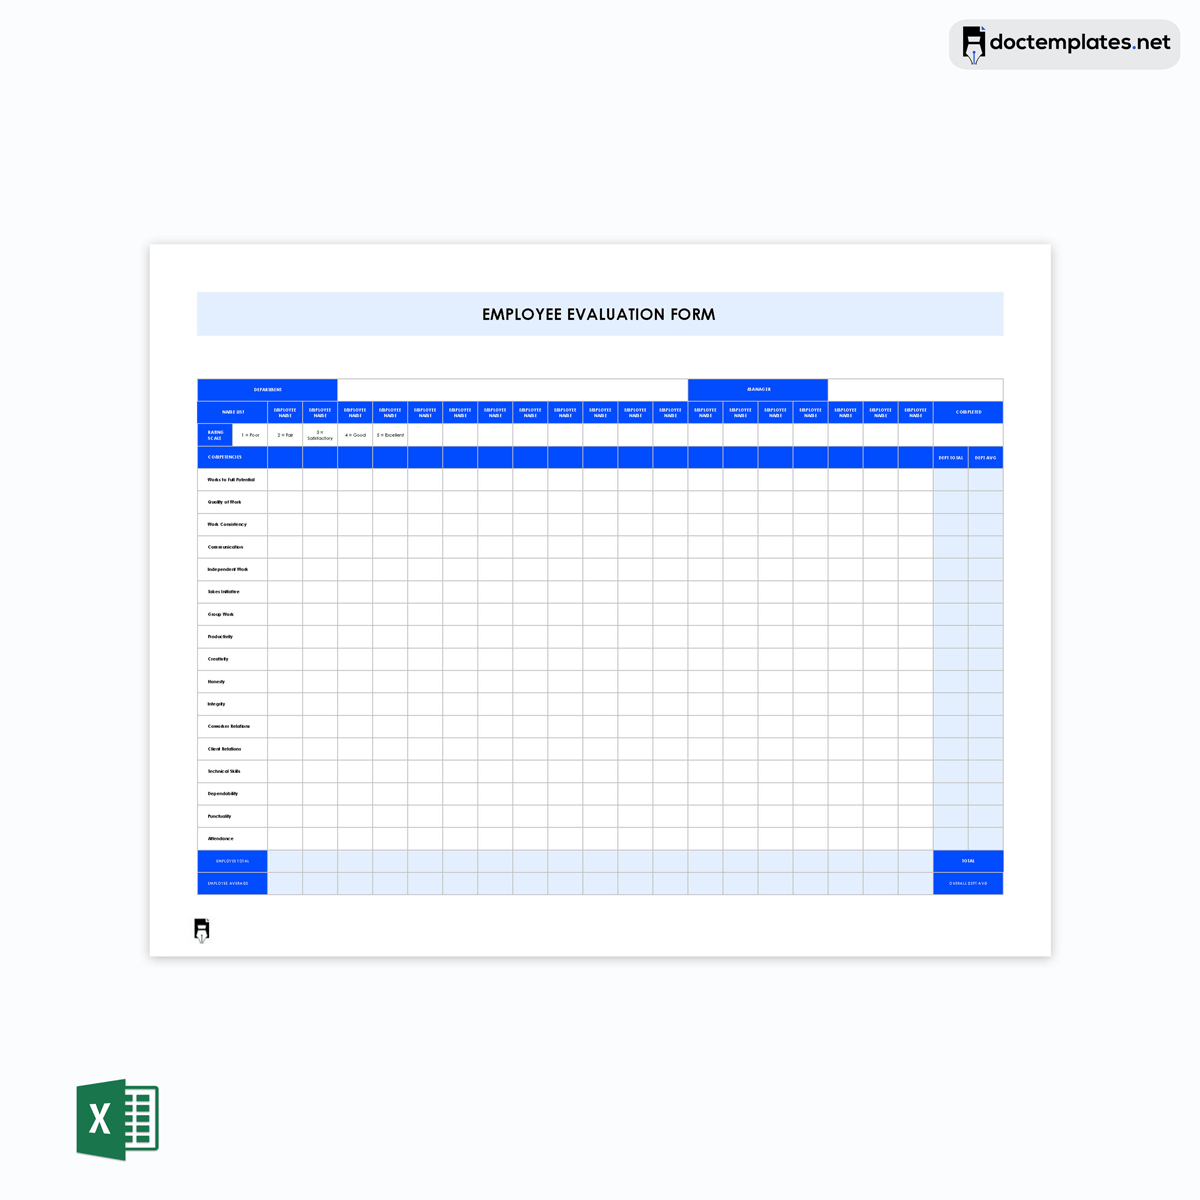 Performance appraisal template in excel